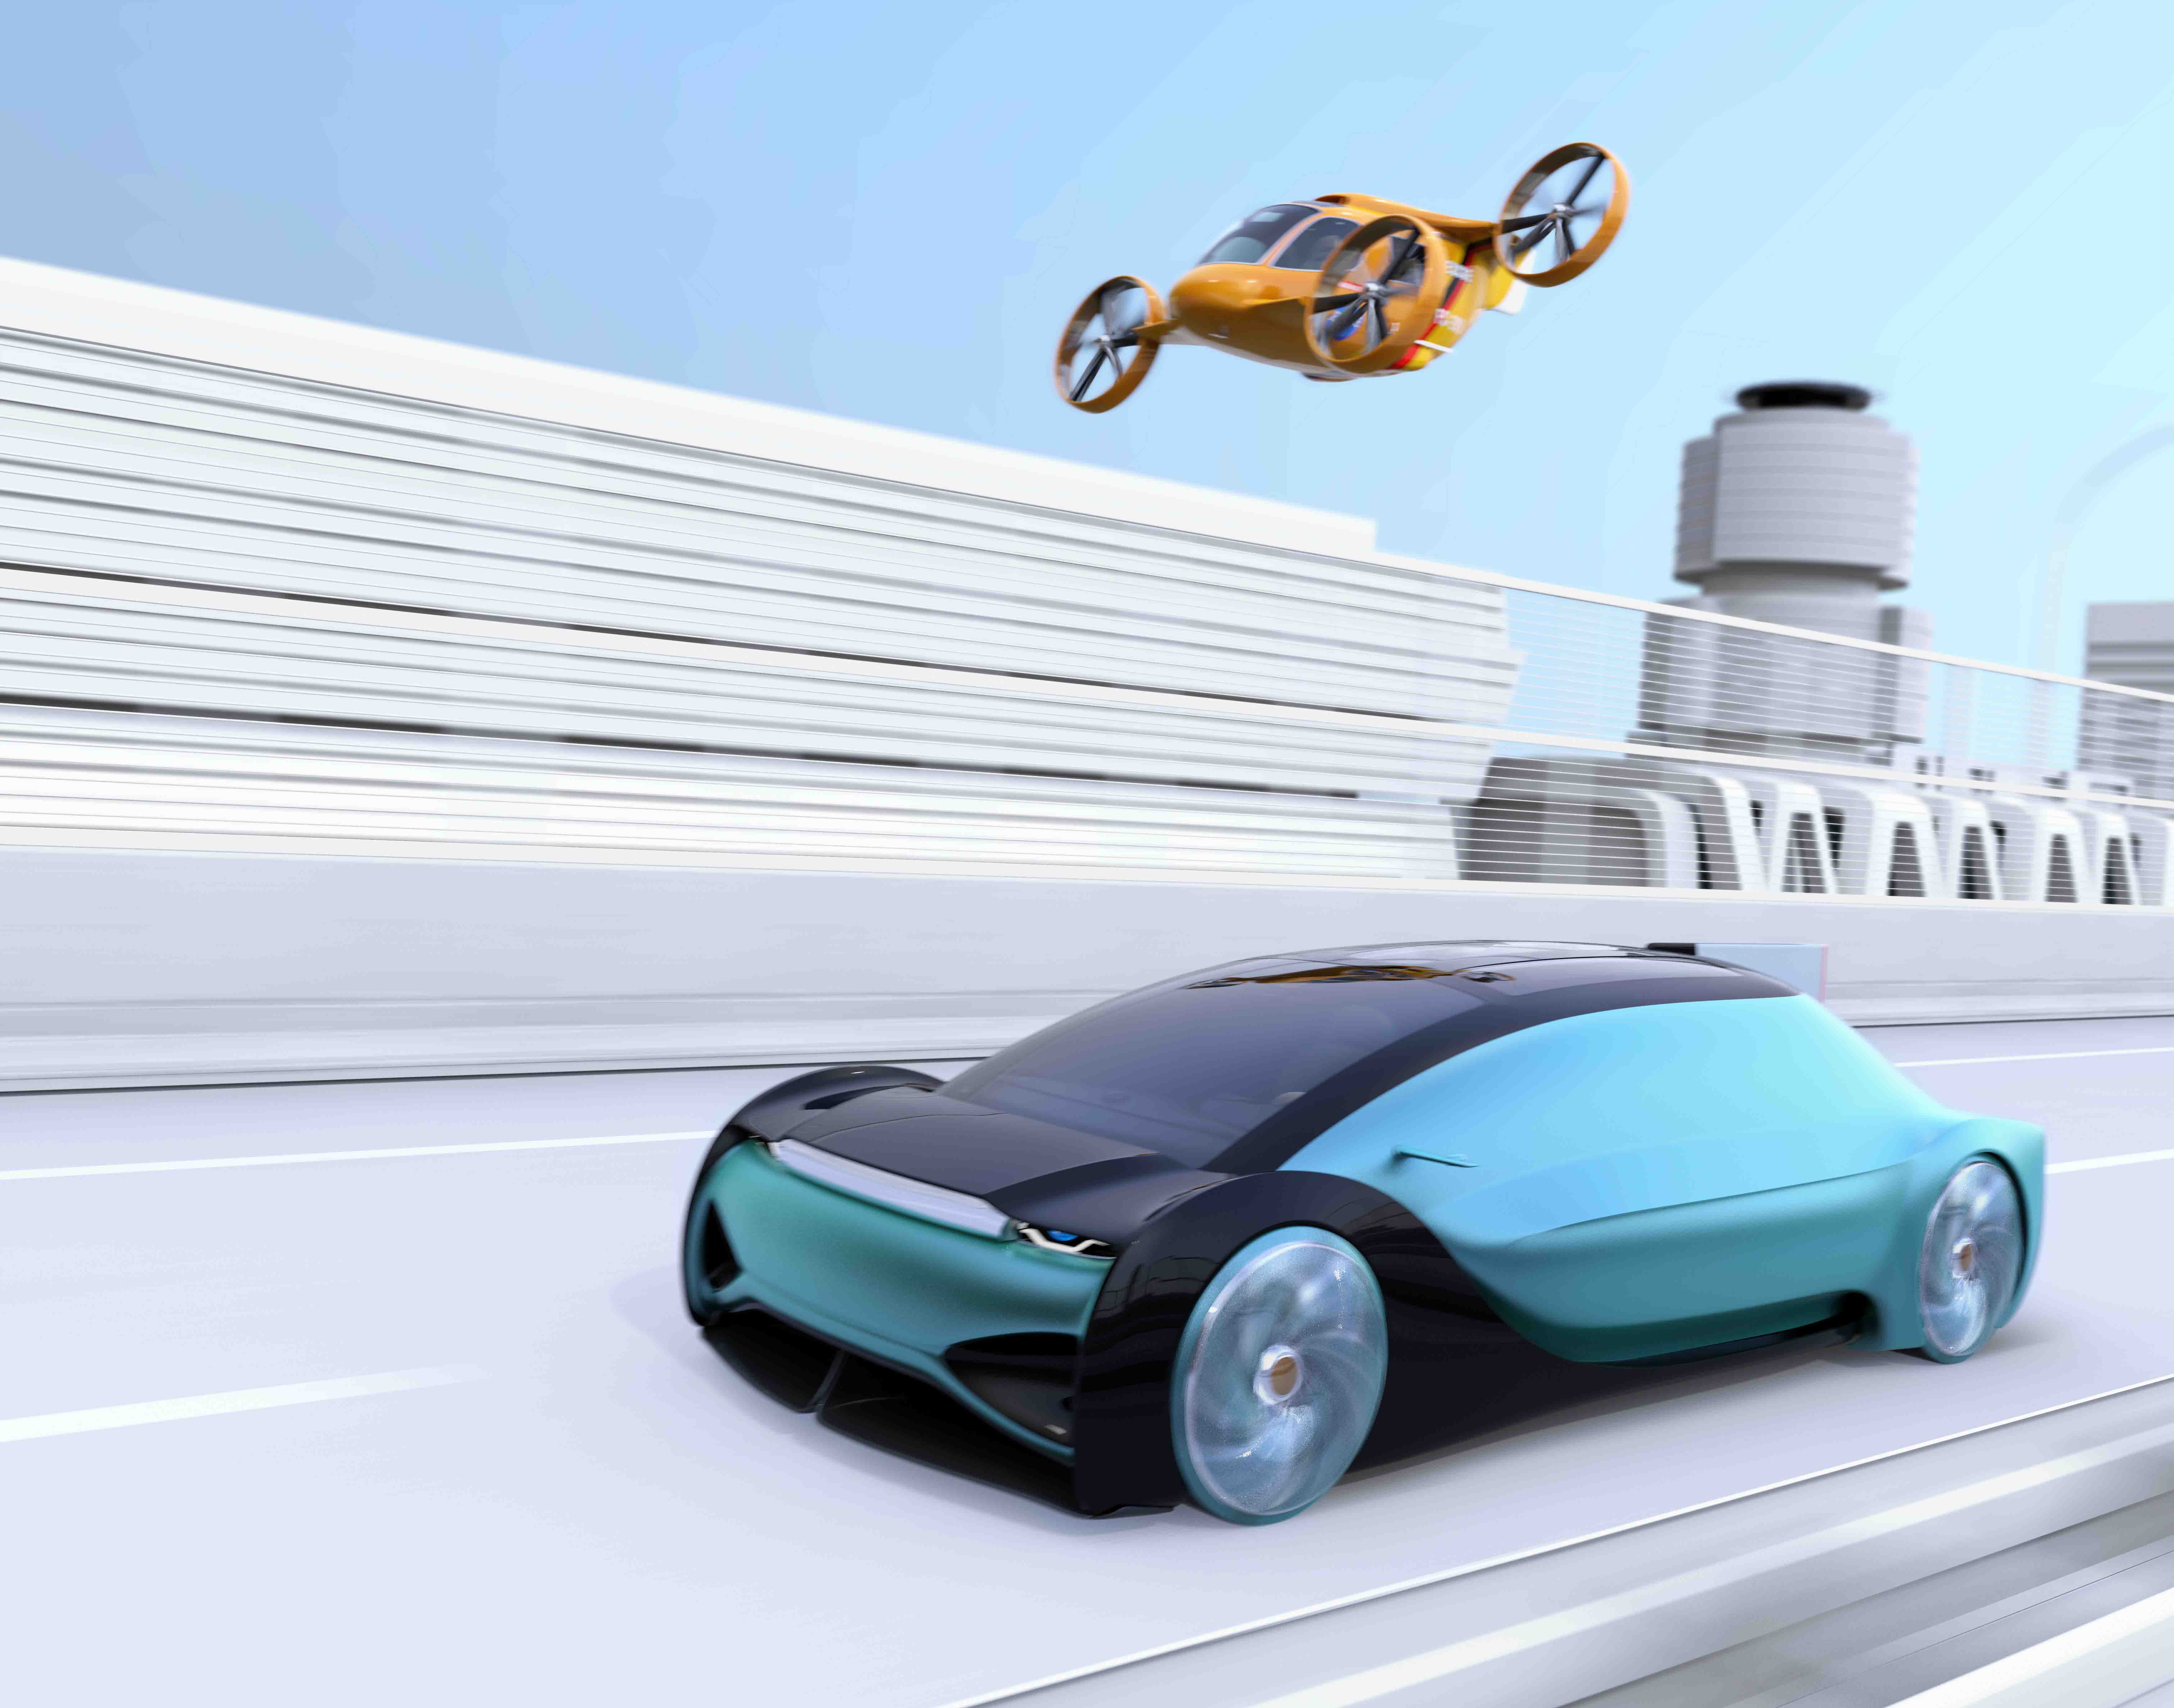 Futuristic representation of mobility of the future with a car and an air taxi